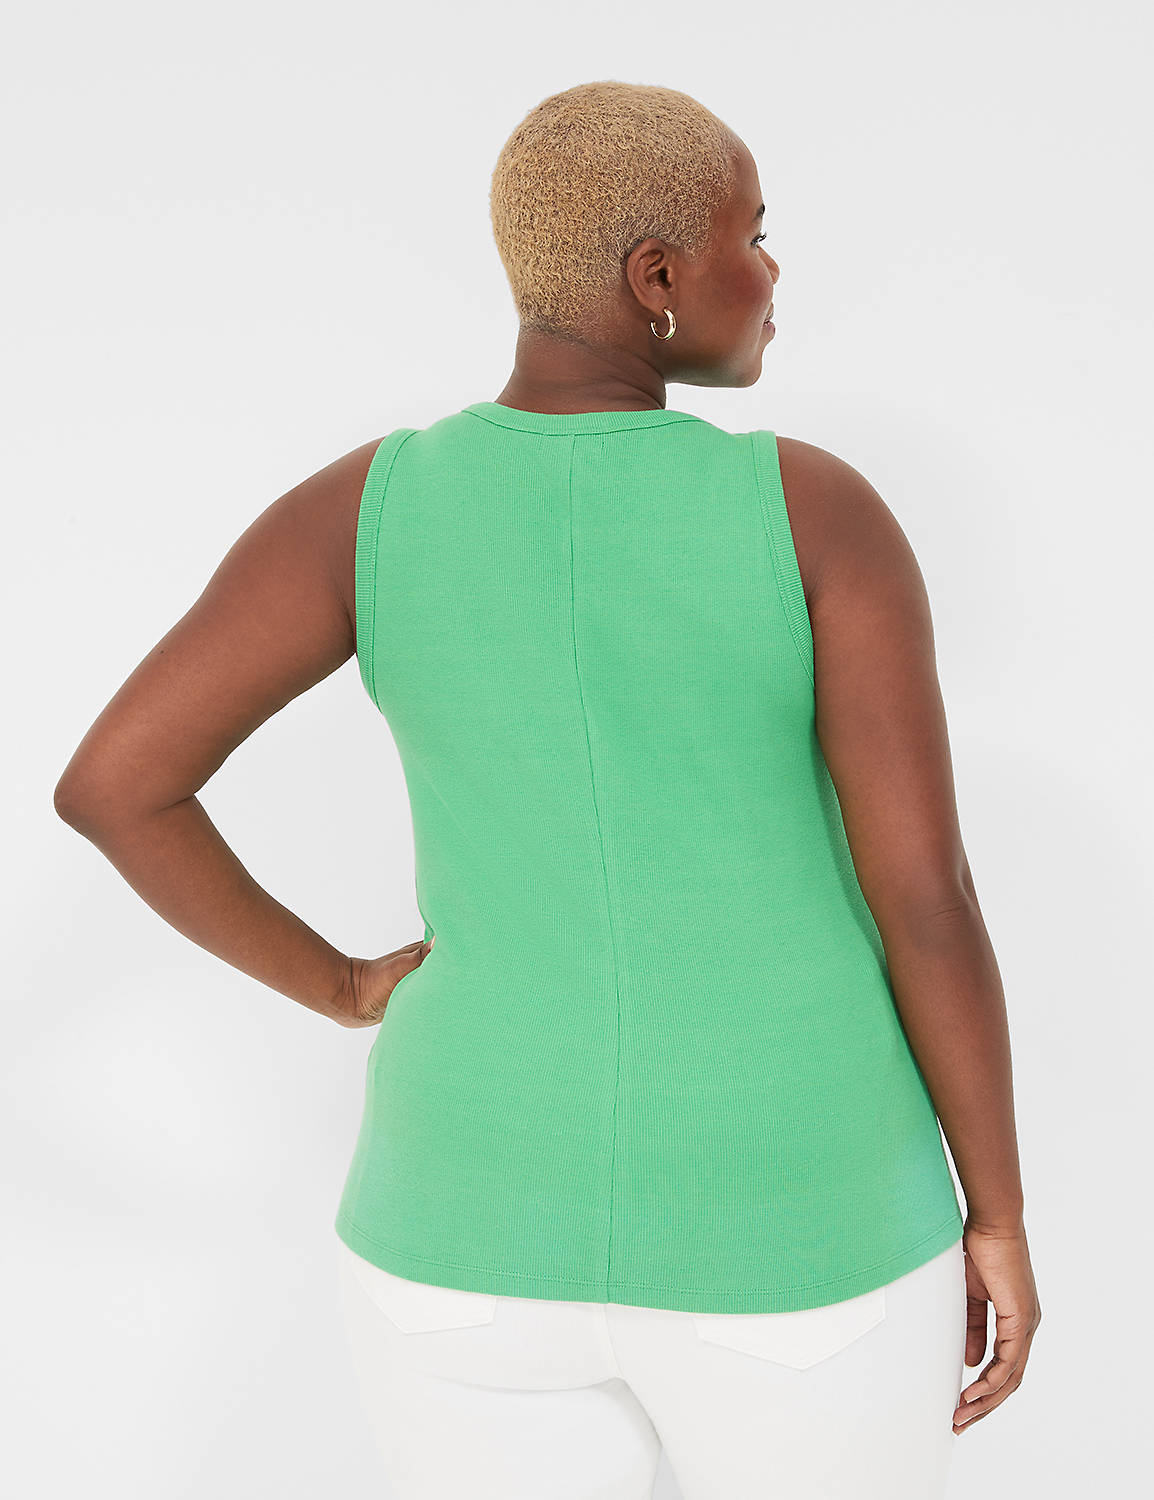 Fitted Sleeveless High Neck 2x2 Rib Product Image 2